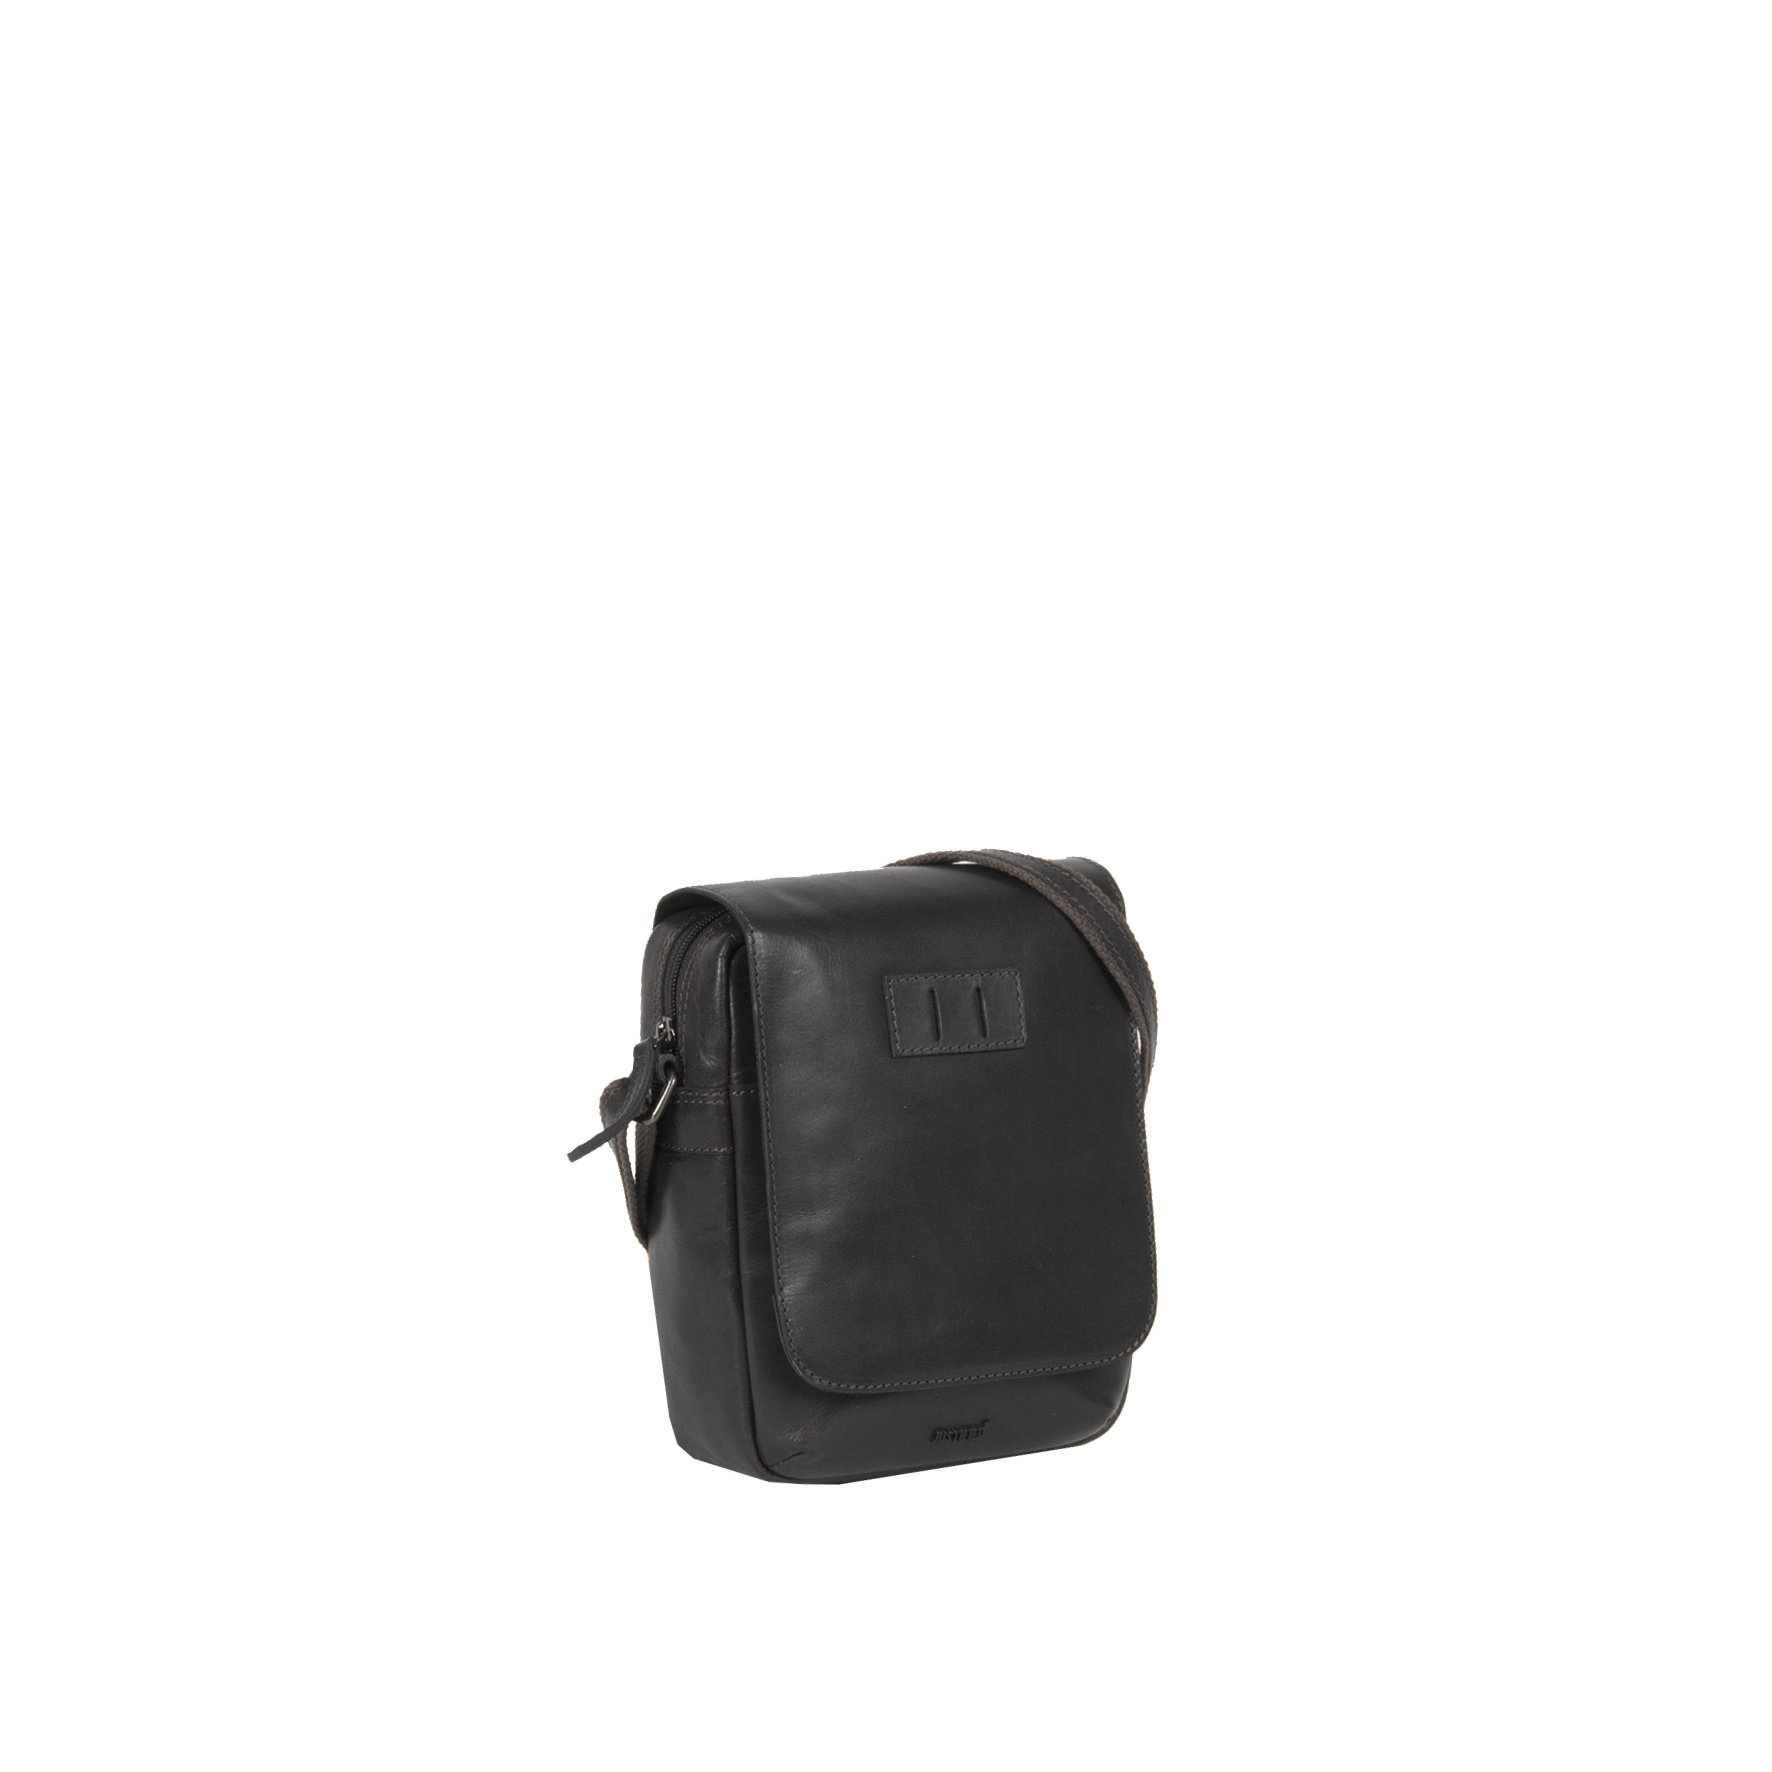 Justified Bags Justified Bags® Titan Small Flapover Black